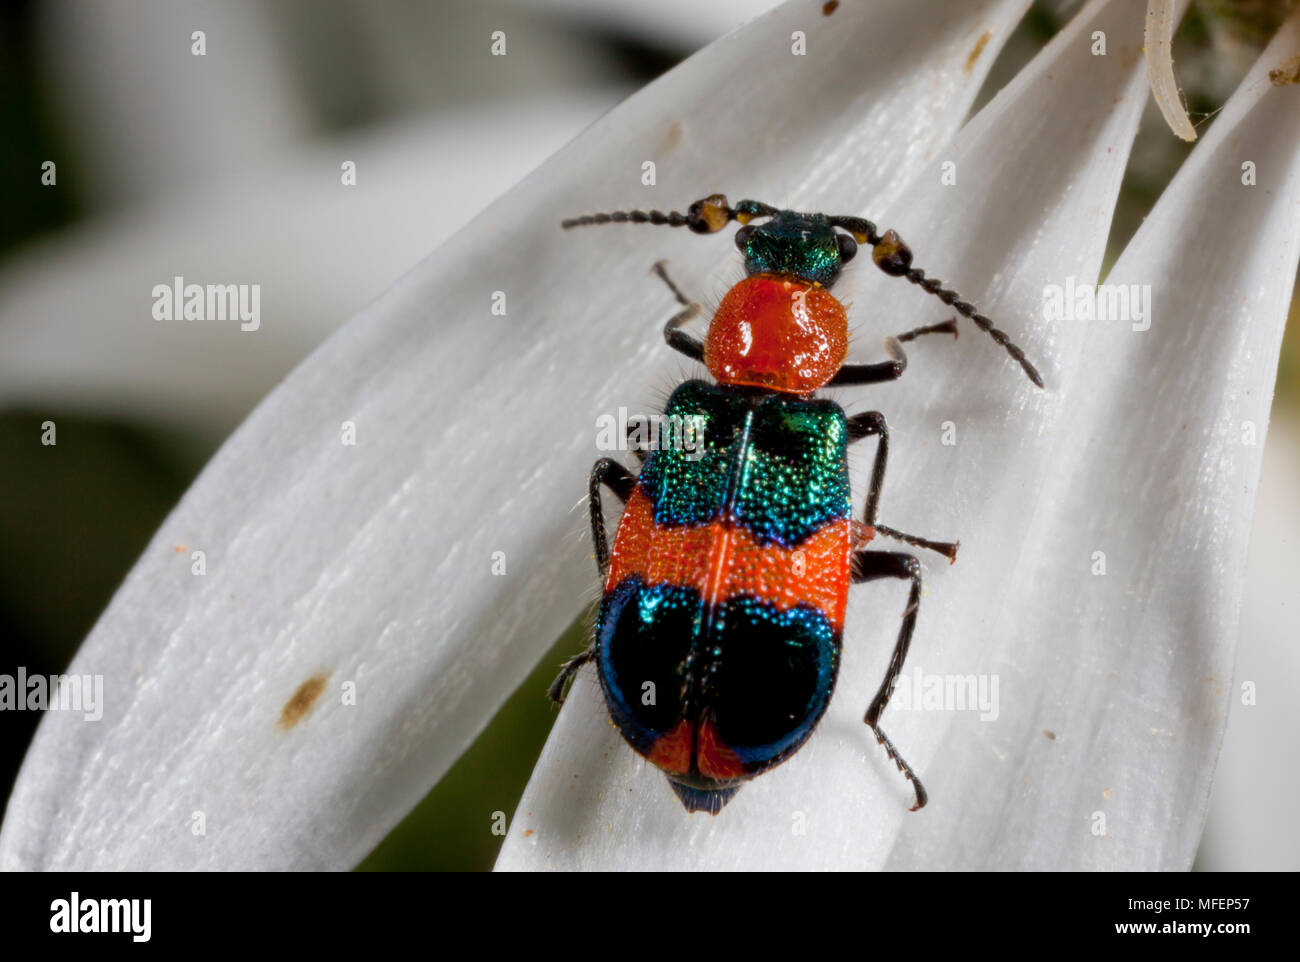 Red and Blue Beetle (Dicranolaius bellus), Fam. Melyridae, Kinchega National Park, New South Wales, Australia Stock Photo